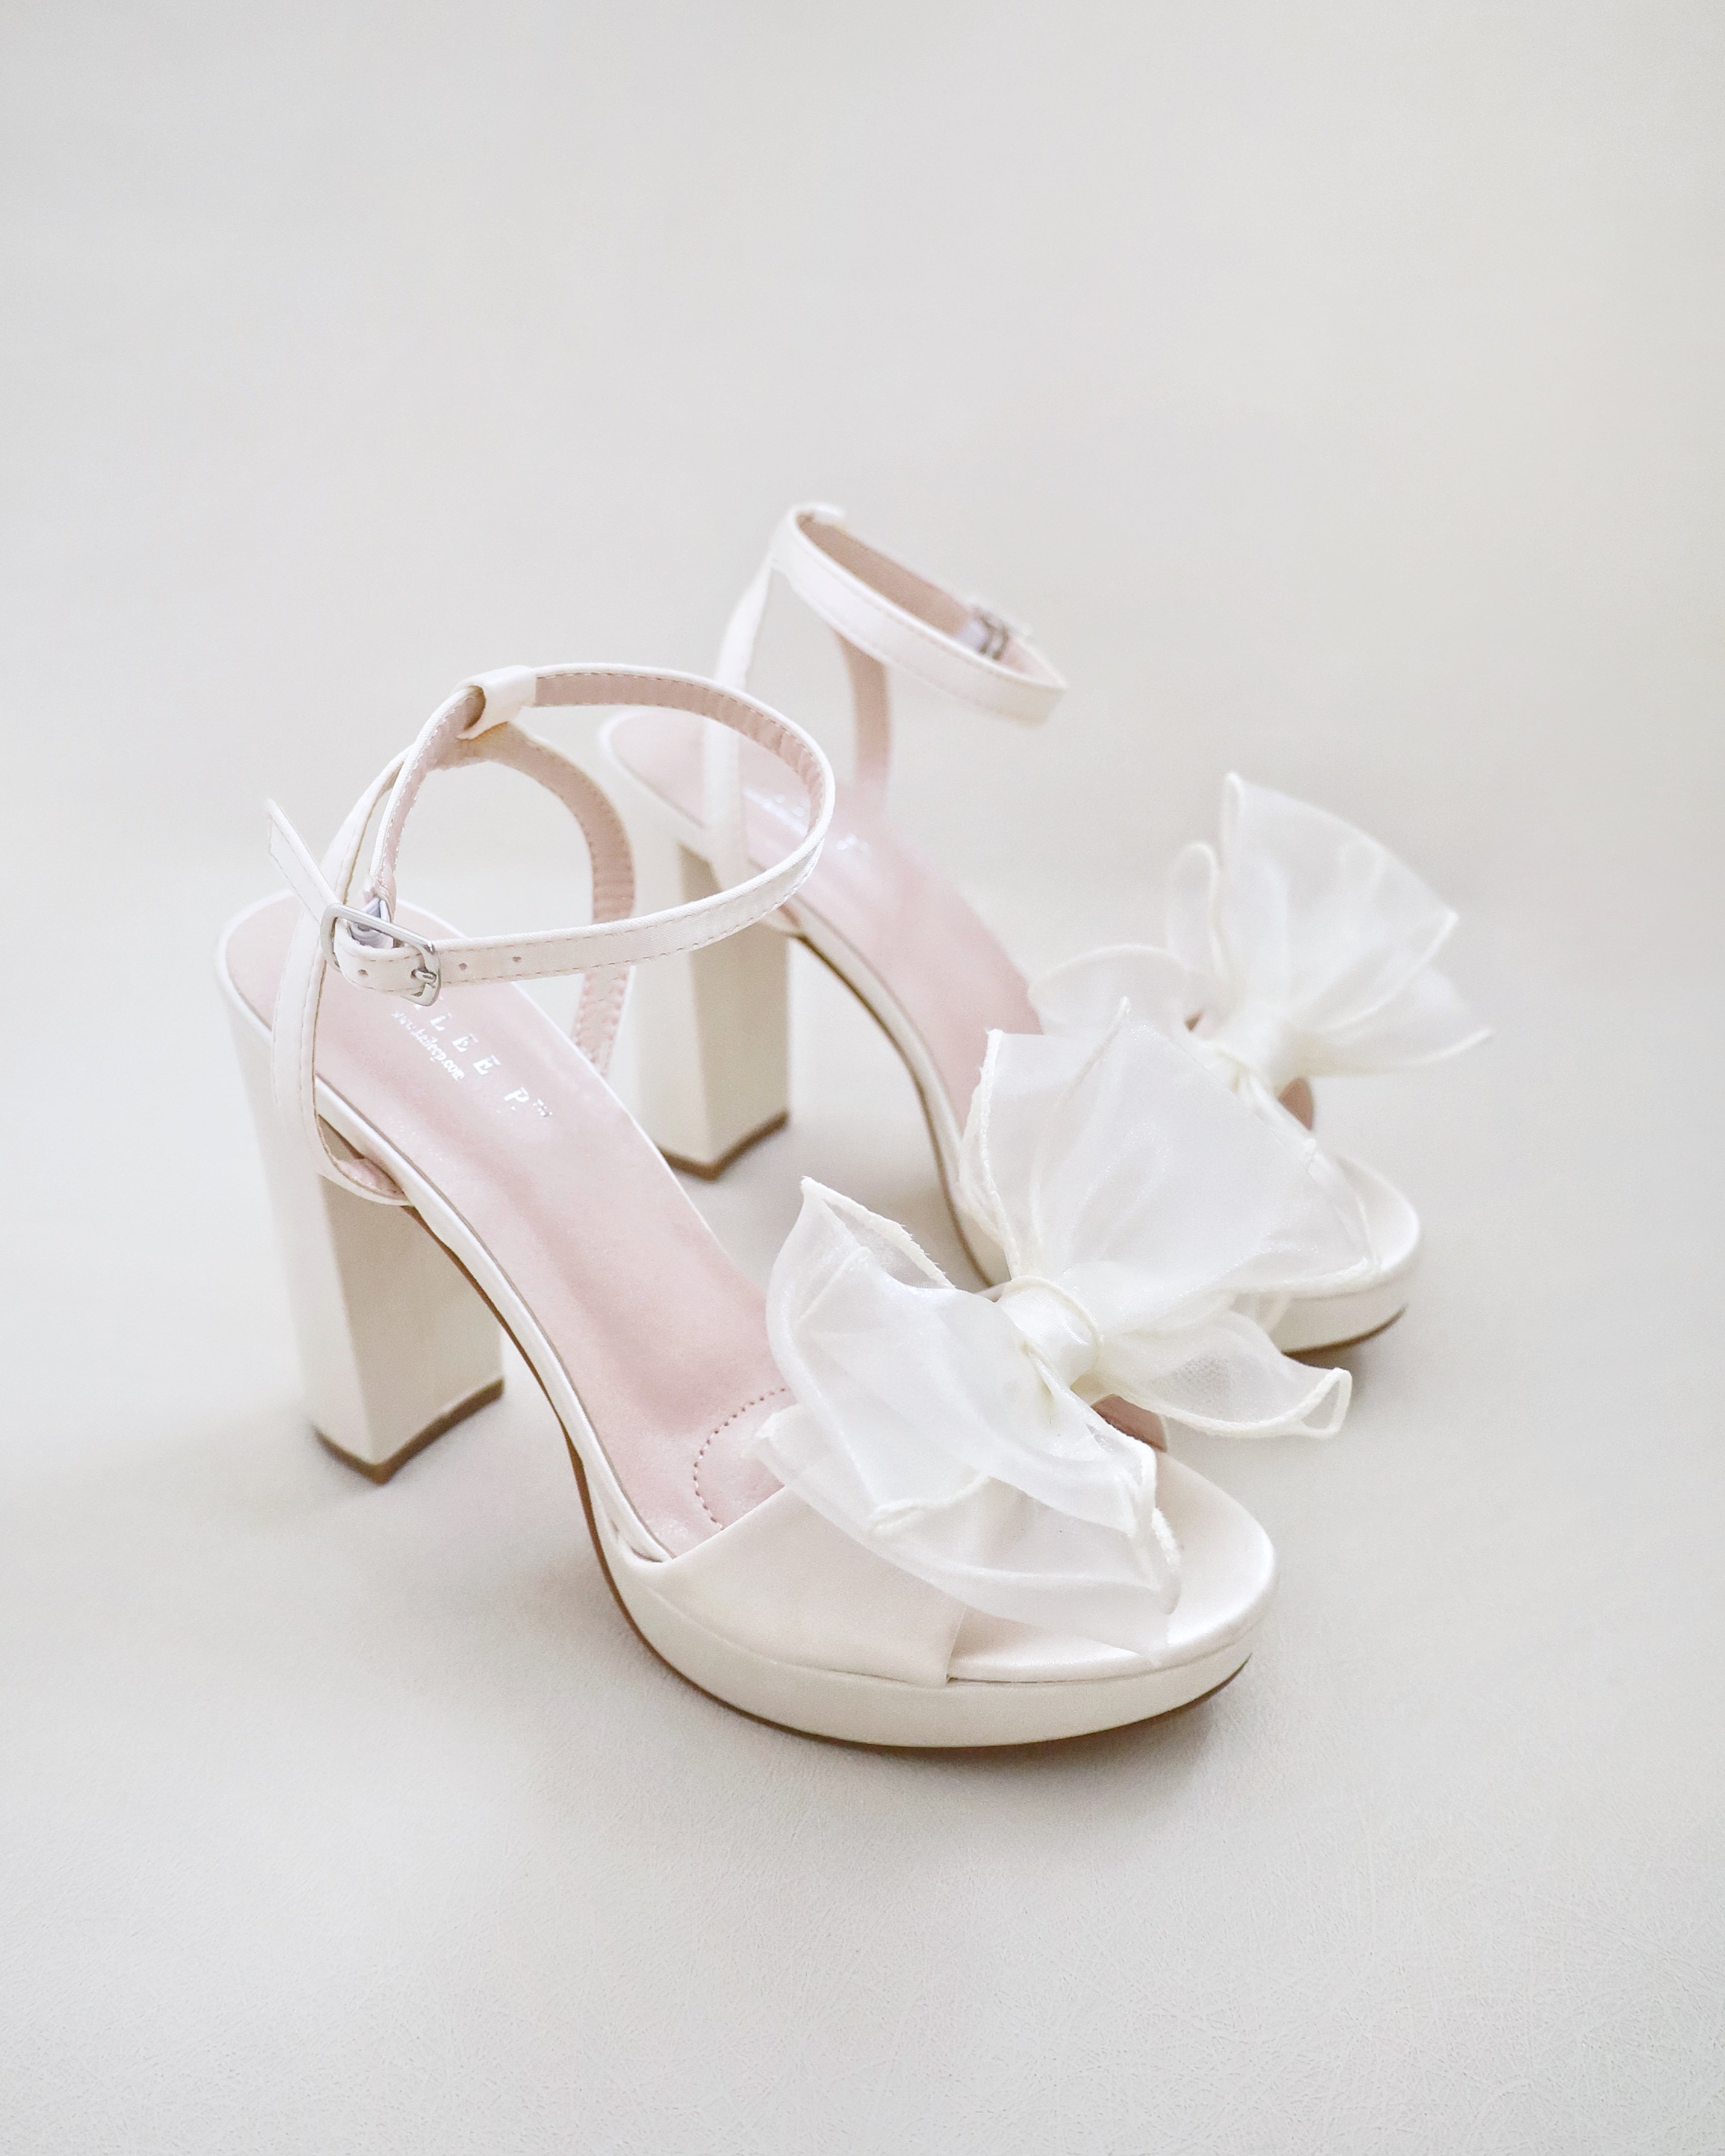 Gorgeous Bridal Shoes With Flower Power | by Bride & Blossom, NYC's Only  Luxury Wedding Florist -- Wedding Ideas, Tips and Trends for the Modern,  Sophisticated Bride